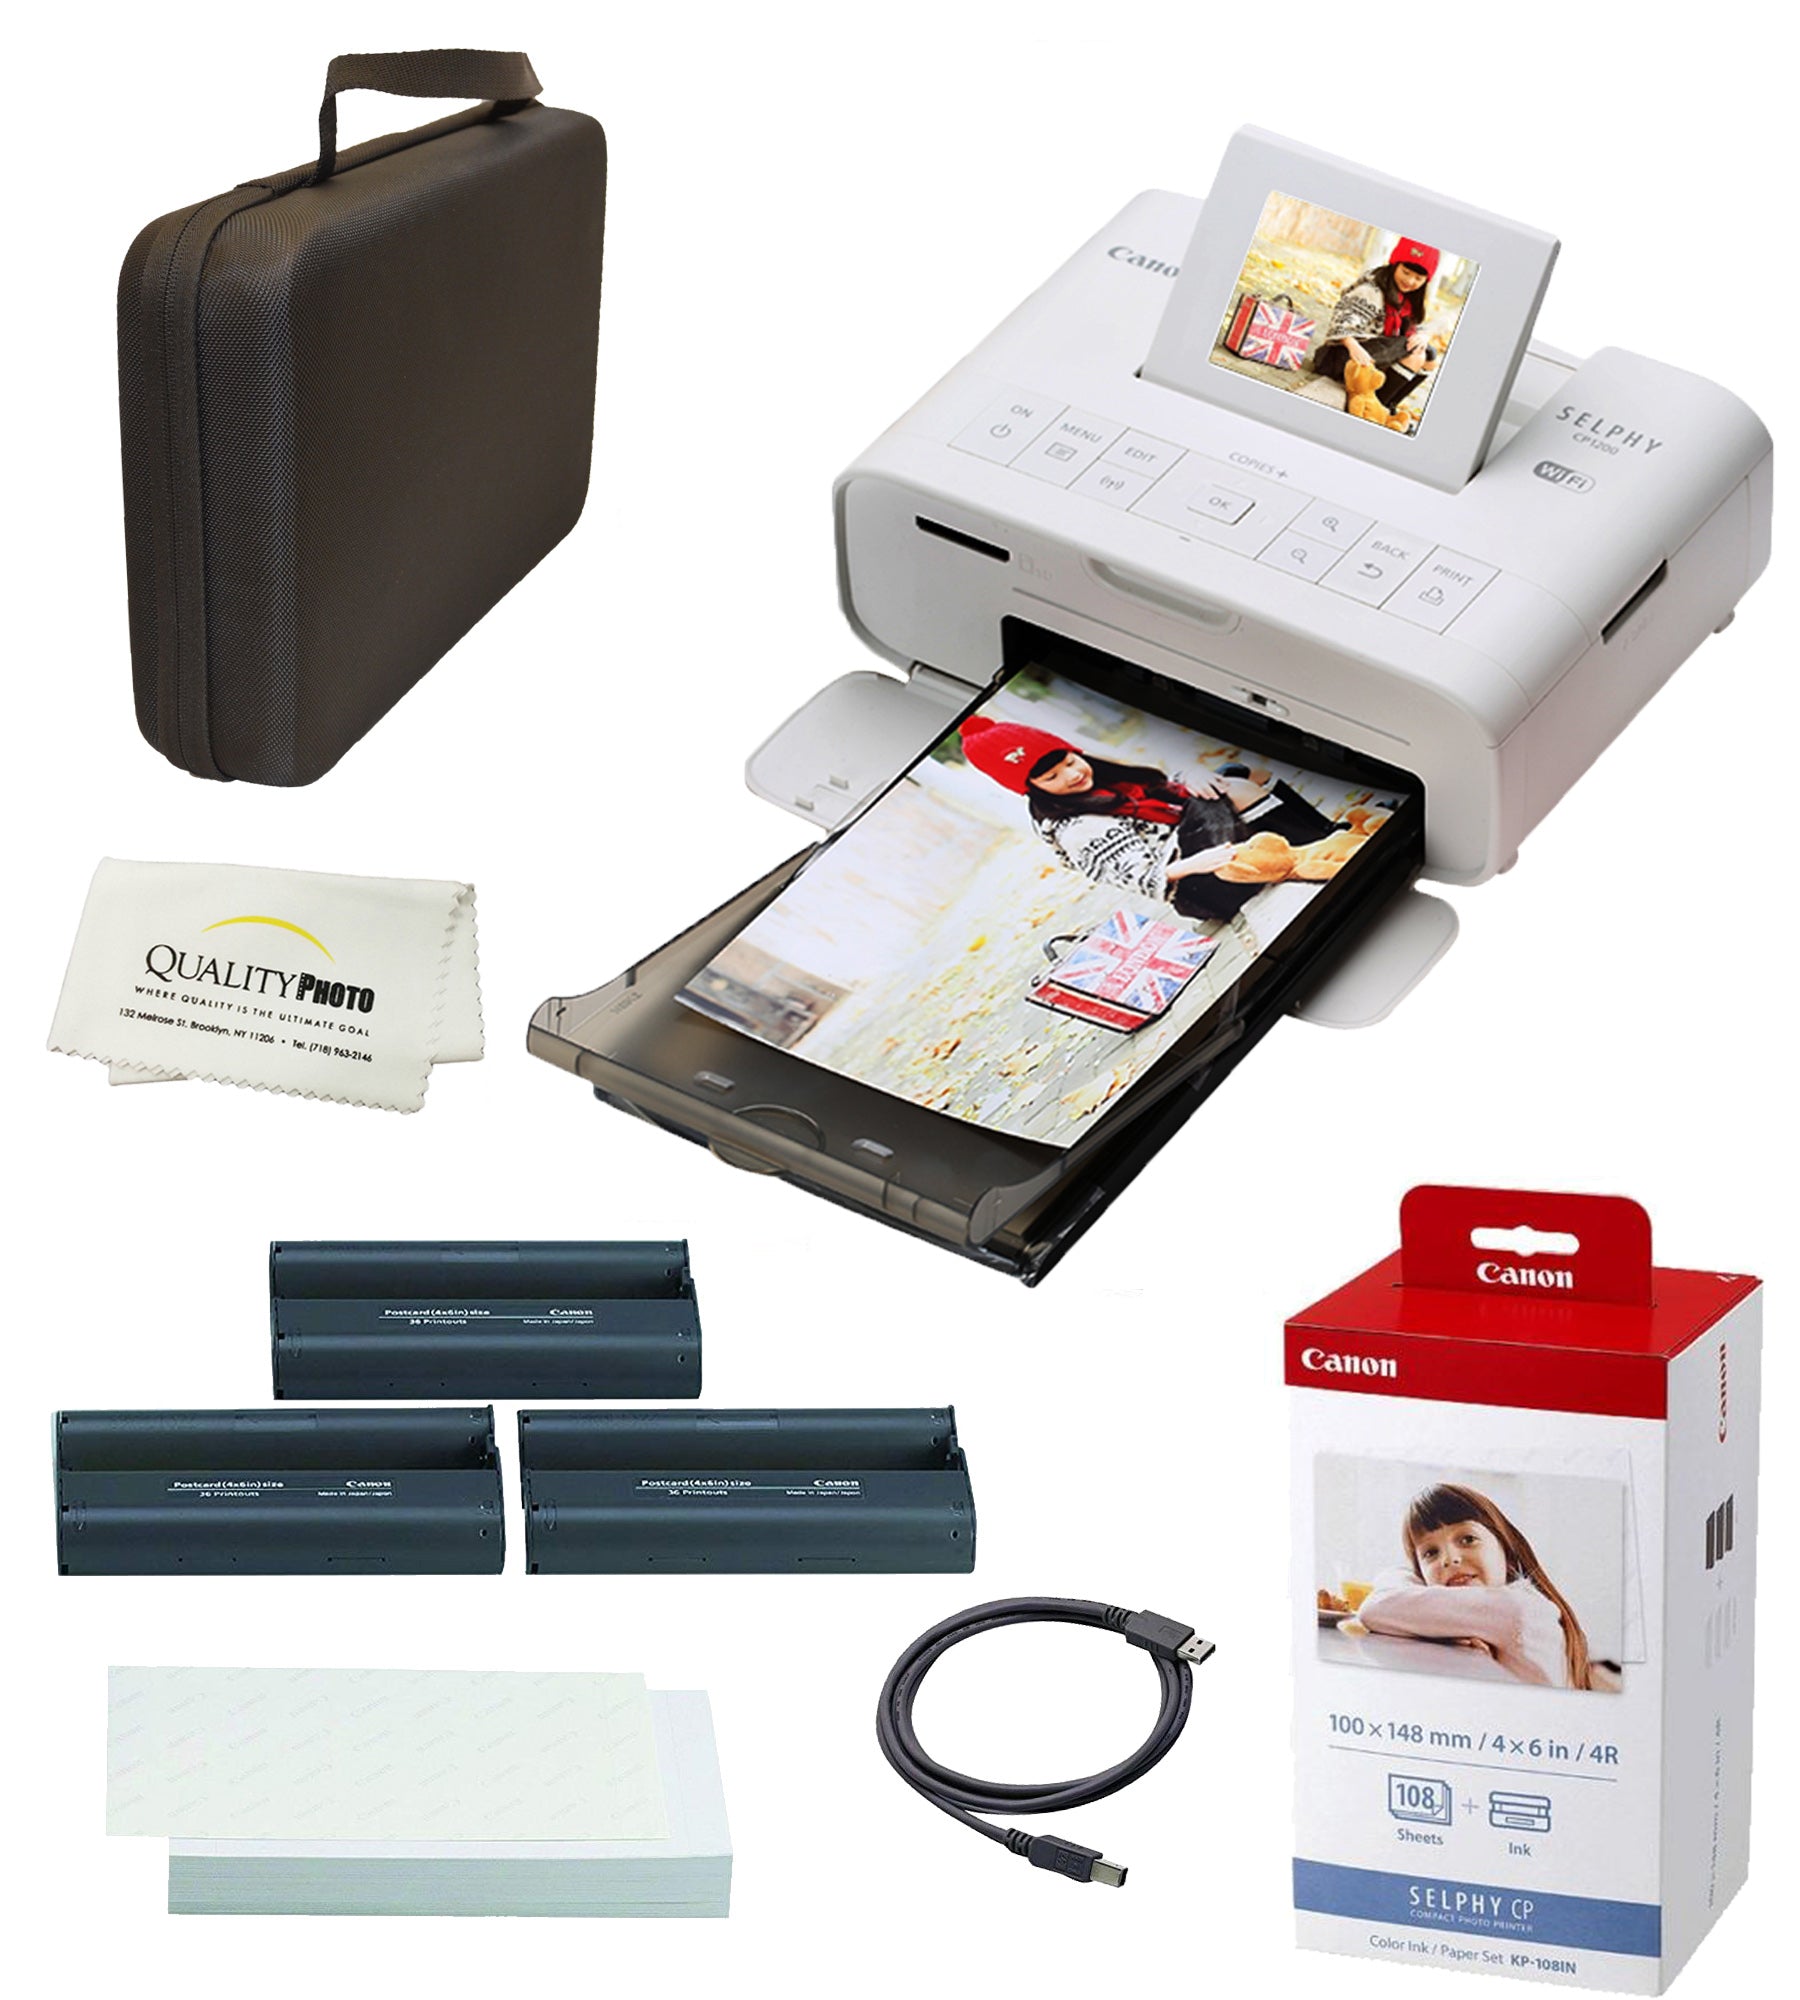 Canon SELPHY CP1300 Wireless Compact Photo Printer with AirPrint and Mopria Device Printing, Black, With Canon KP108 Paper And Black hard case to fit all together